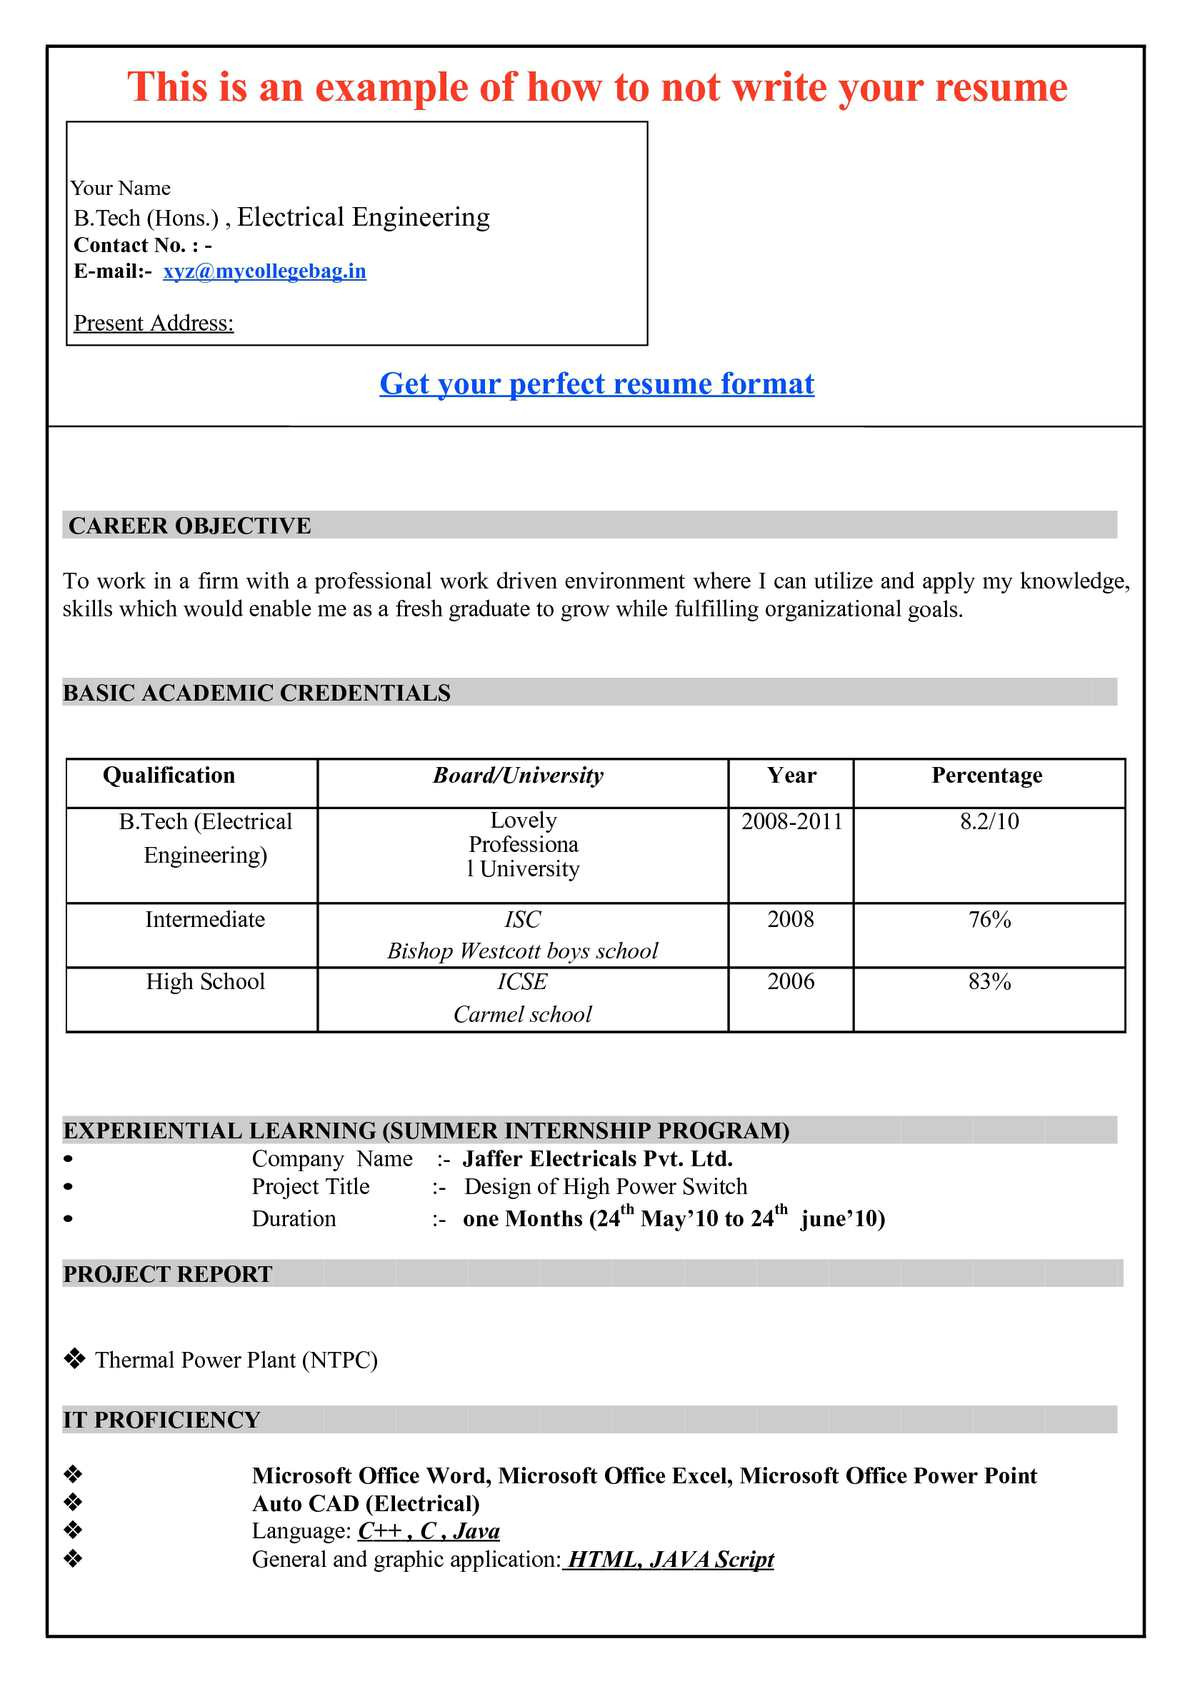 Sample Resume for Freshers It Engineers CalamÃ©o – Samples Resume for Freshers Engineers Pdf